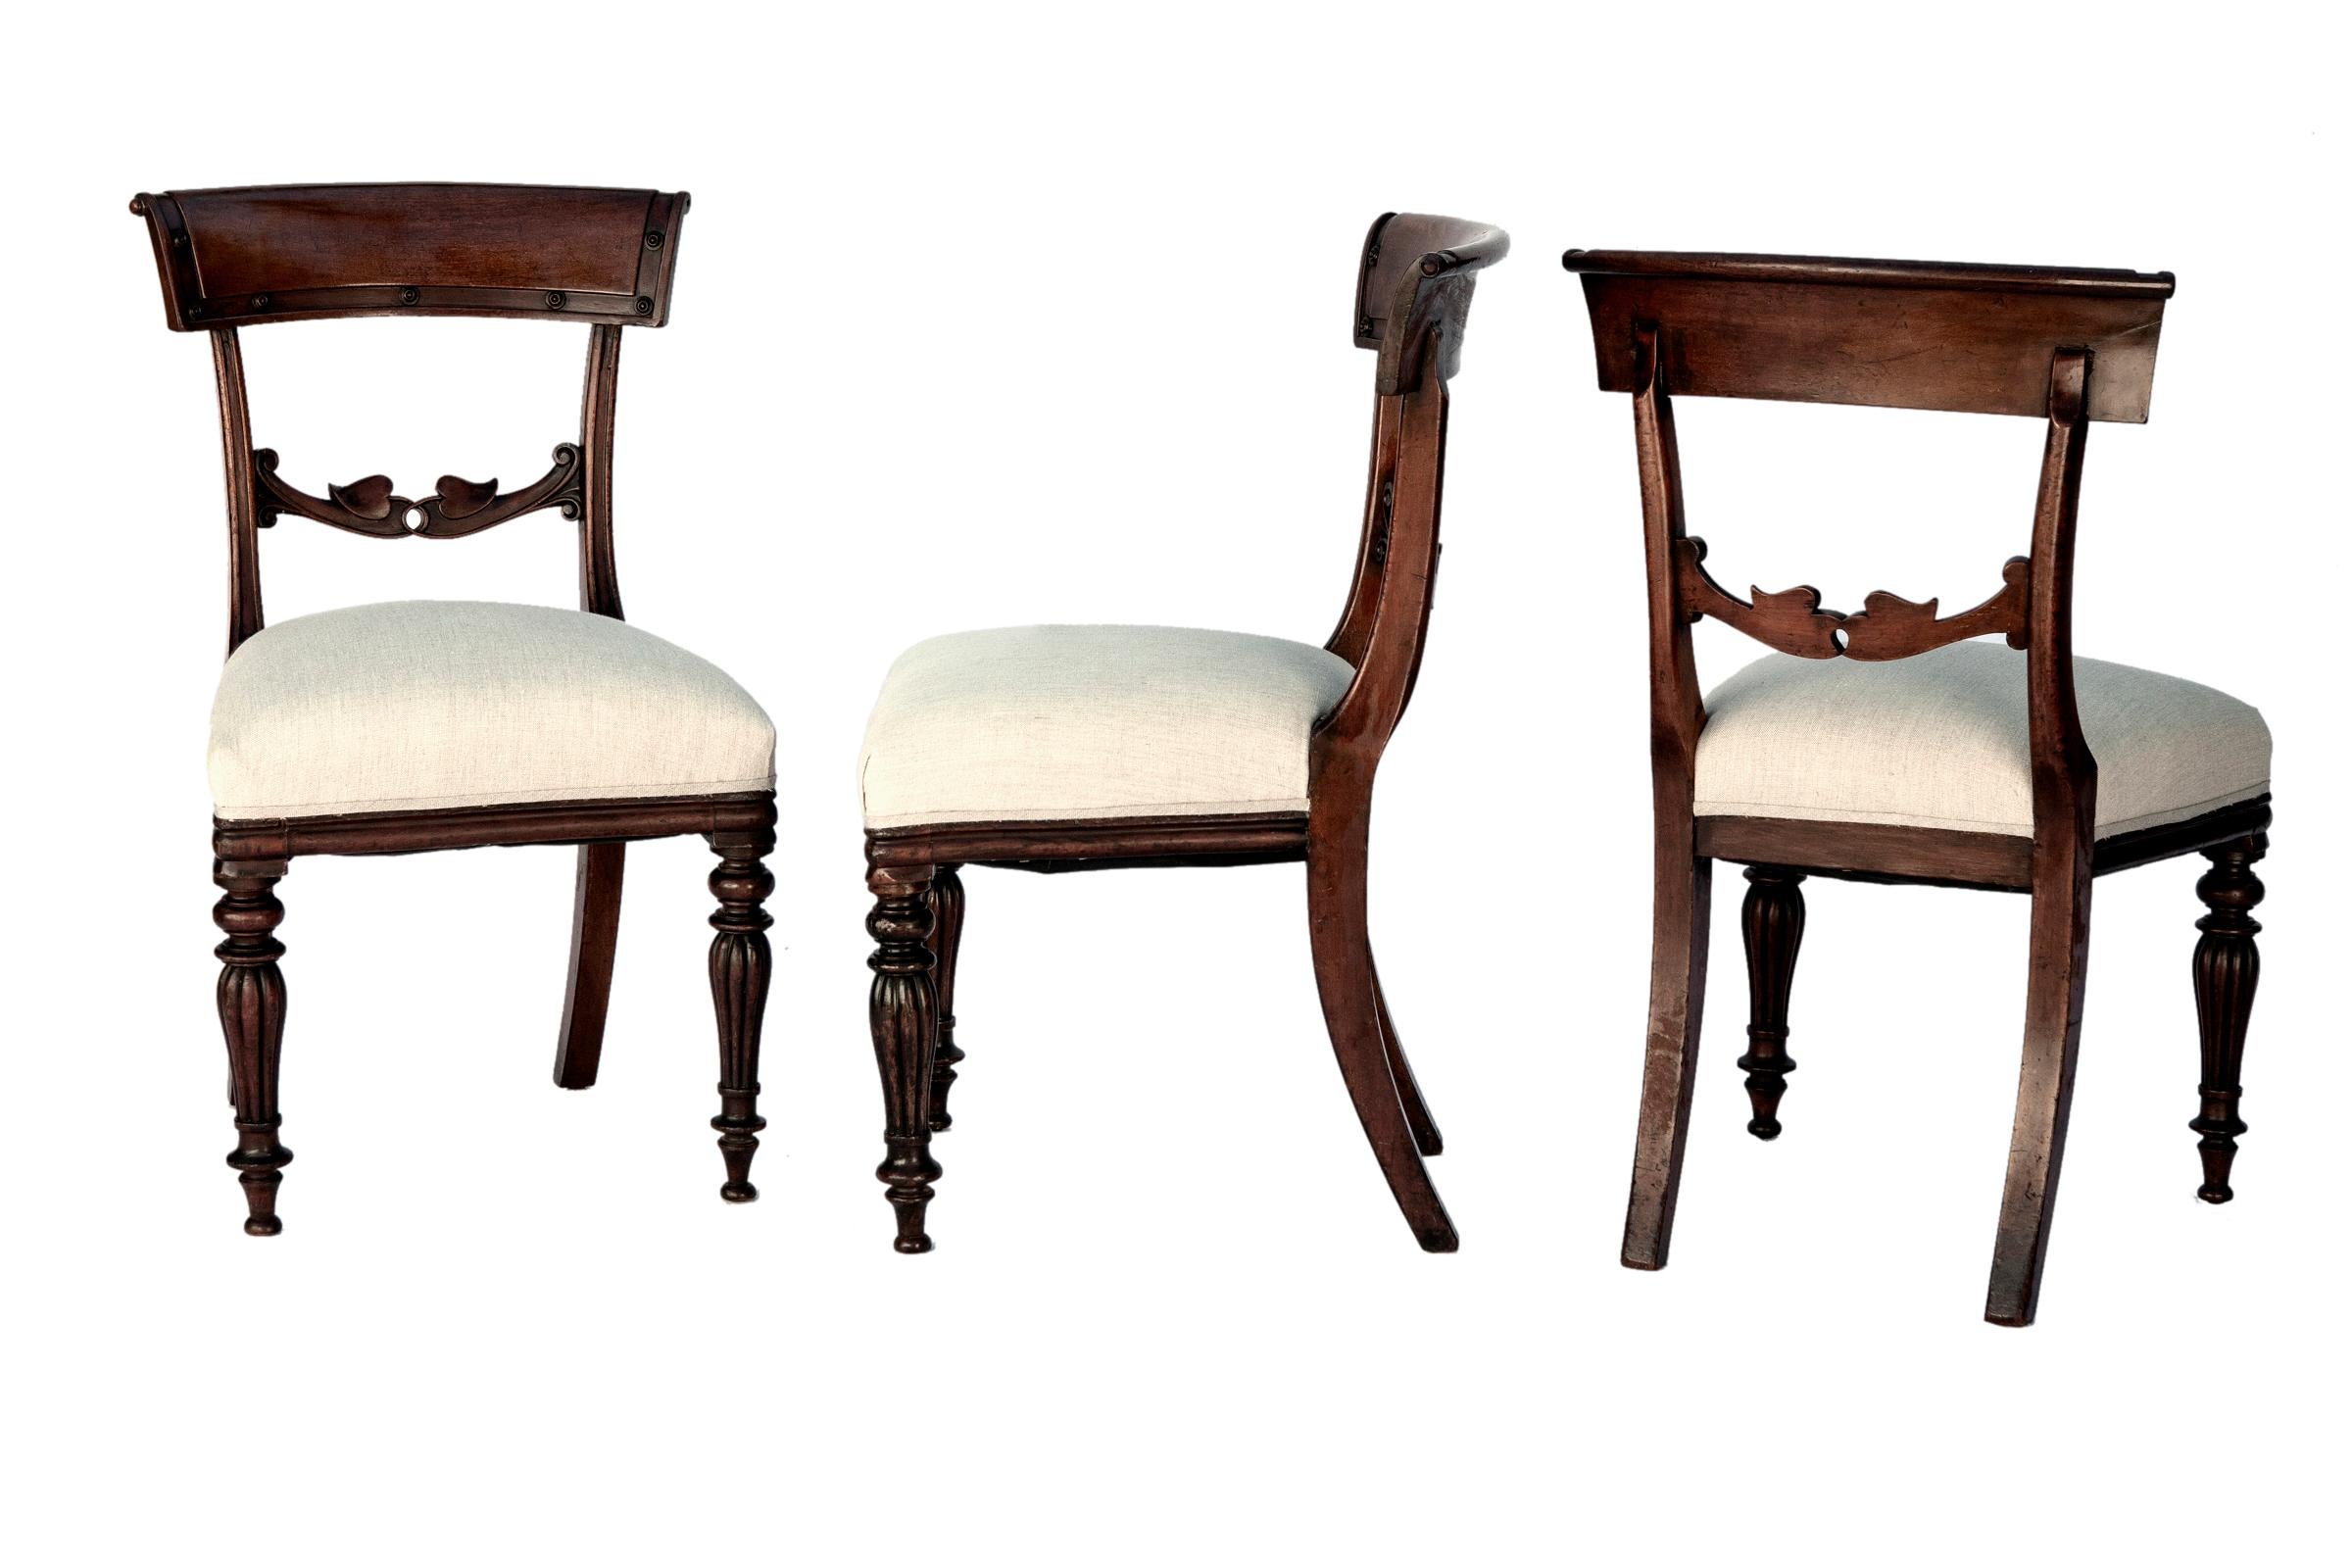 Neoclassical Empire Period Mahogany Dining Chairs In Good Condition For Sale In Malibu, CA